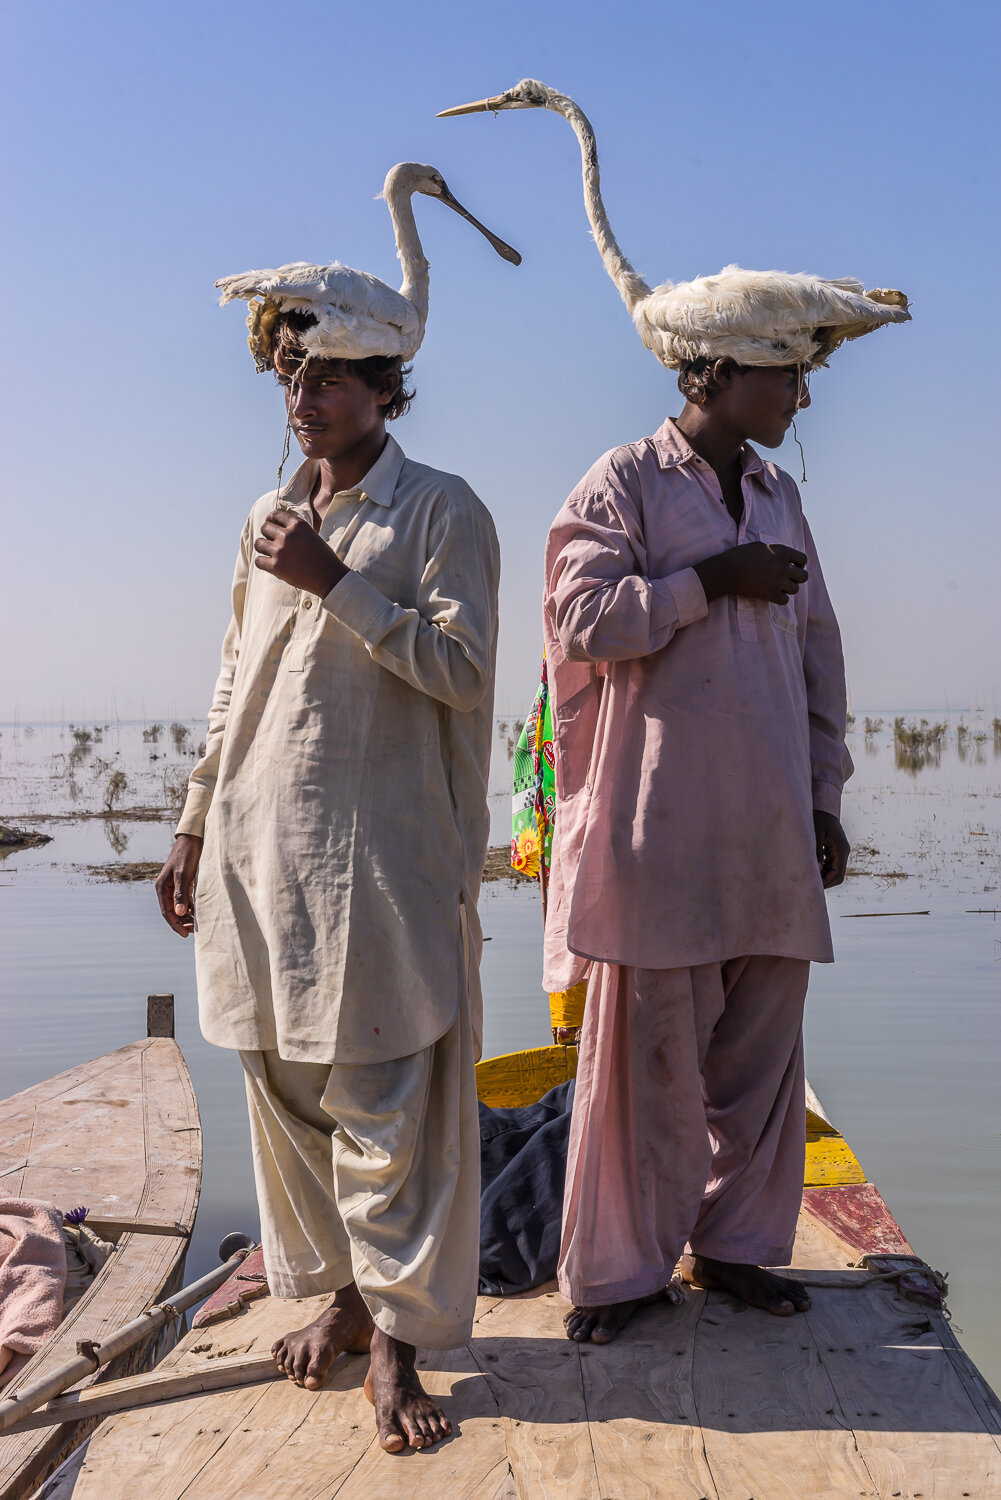  Residents of the floating village on Manchar Lake pose for a portrait with artificial birds, which they use to disguise themselves for bird hunting, on Monday, November 27, 2017 on Manchar Lake, Sindh, Pakistan. Due to the lake becoming more pollute